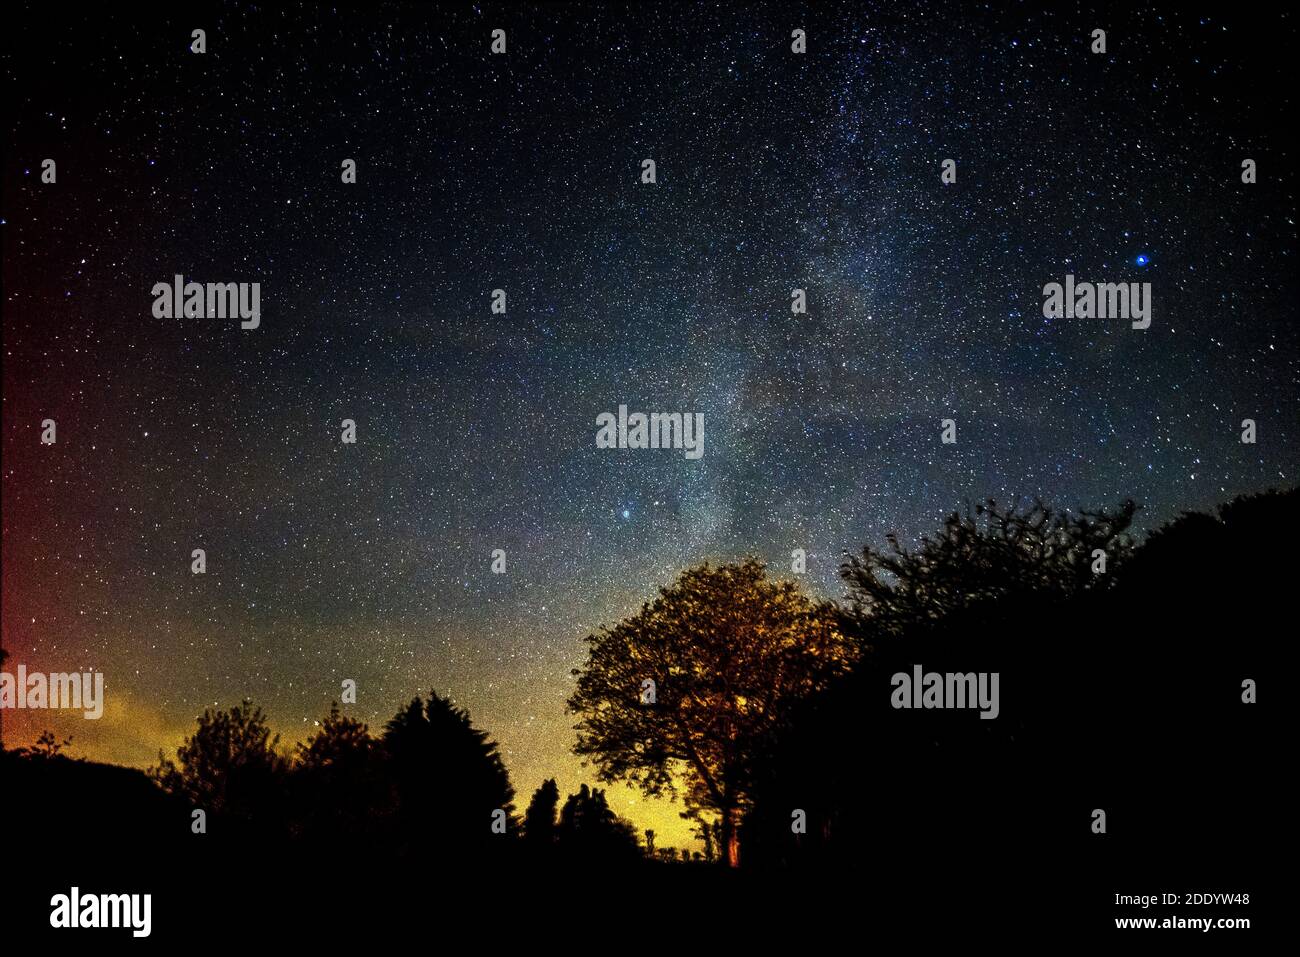 Starscape / star field - Milky Way and Stars, Night Sky and Tree Silhouette Skyline, Southern England, UK Stock Photo